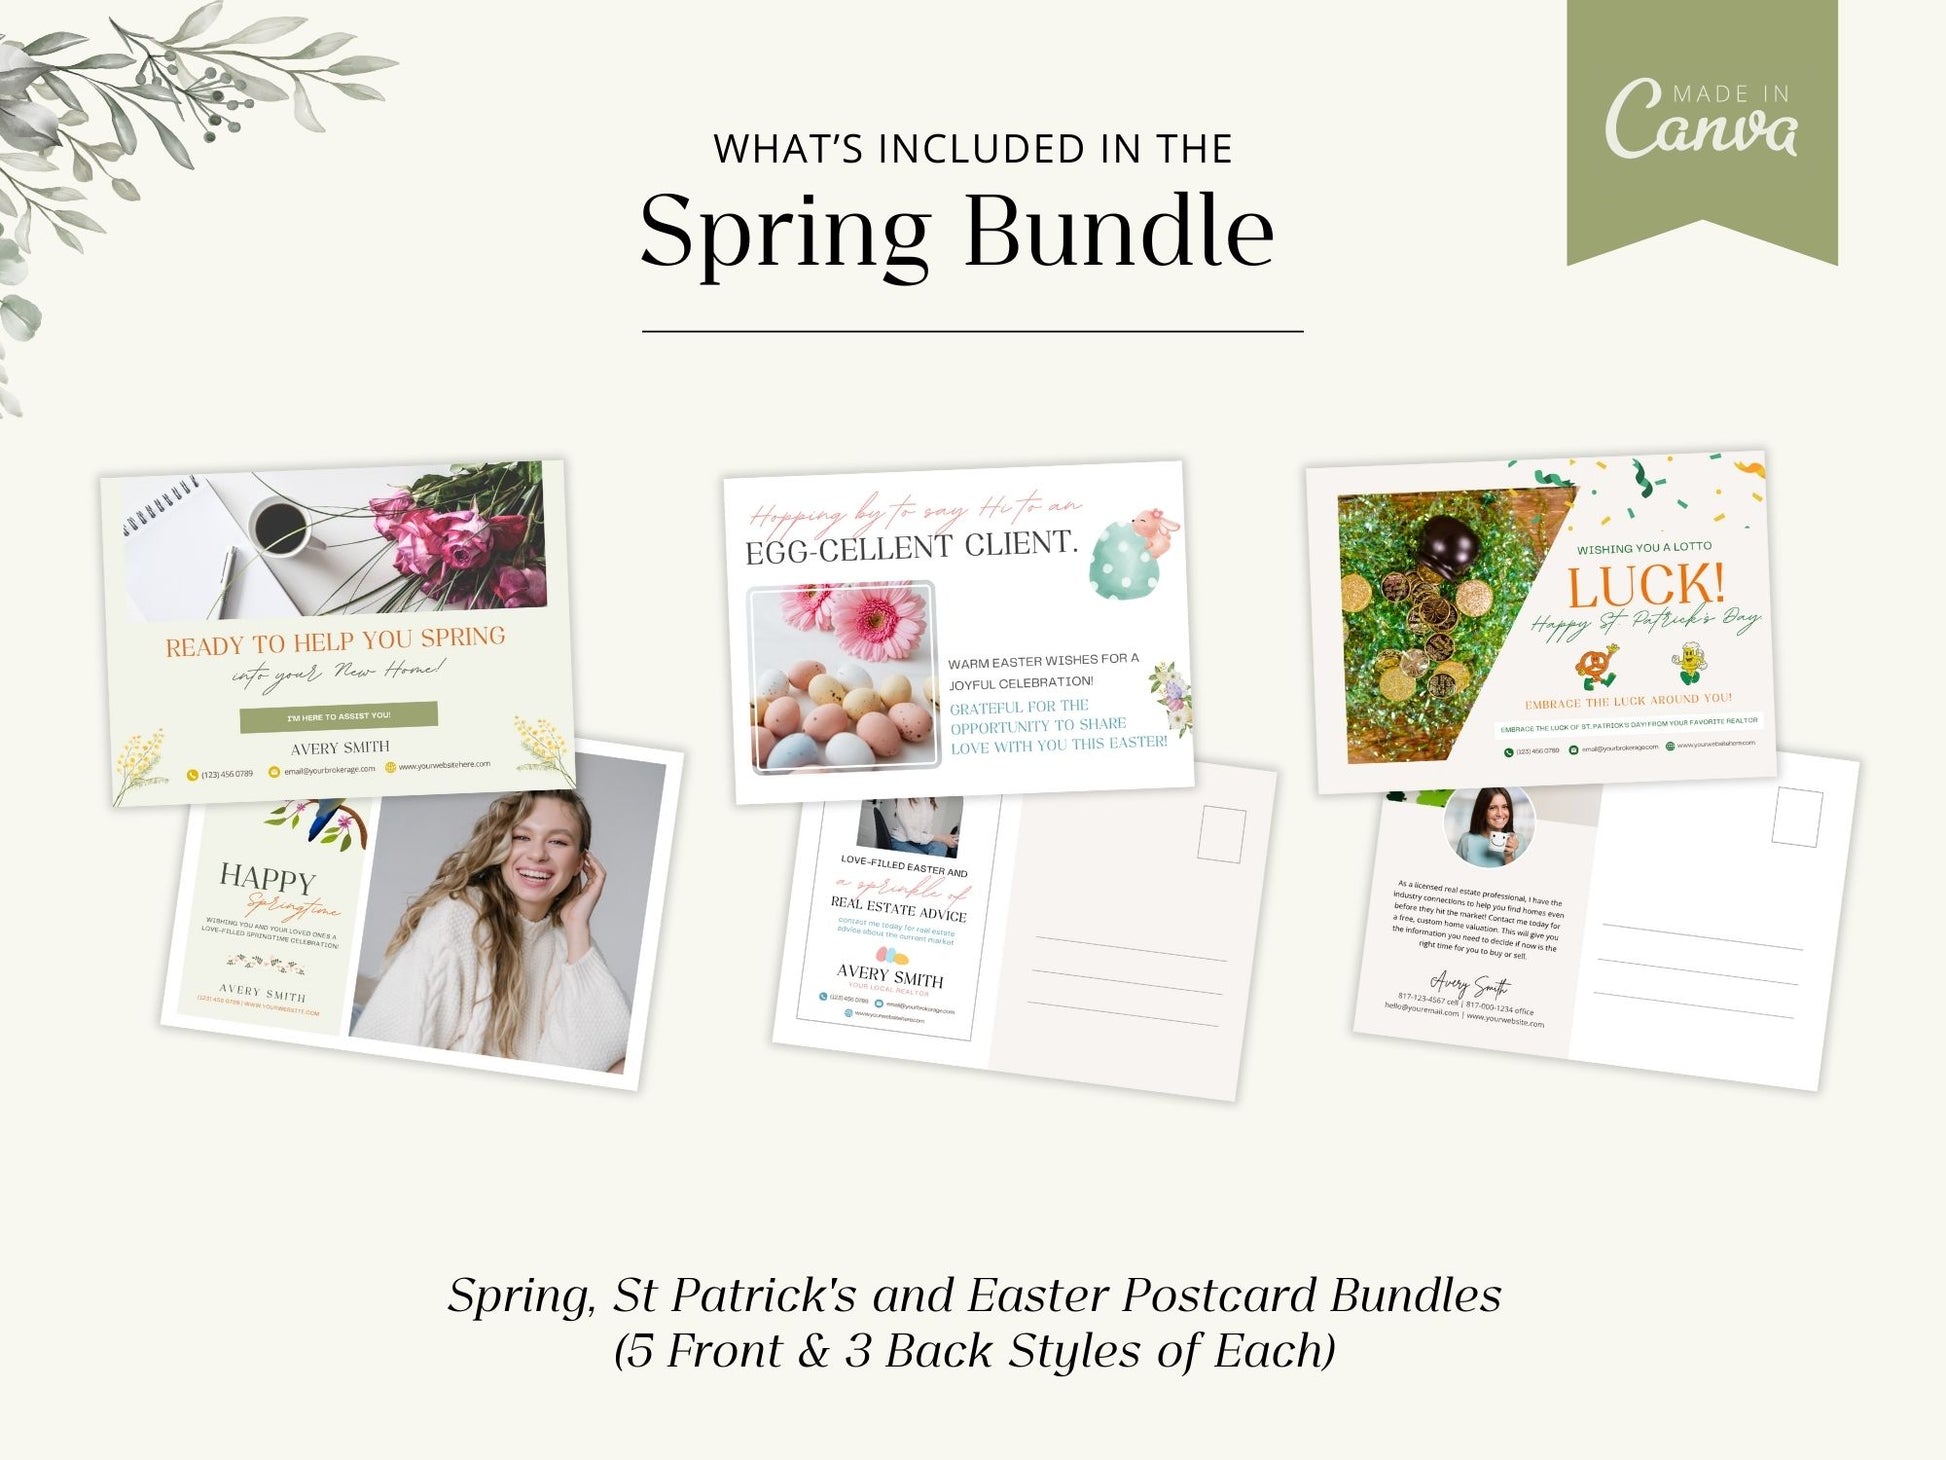 Spring Bundle - A collection of vibrant marketing materials for real estate professionals during the spring season.